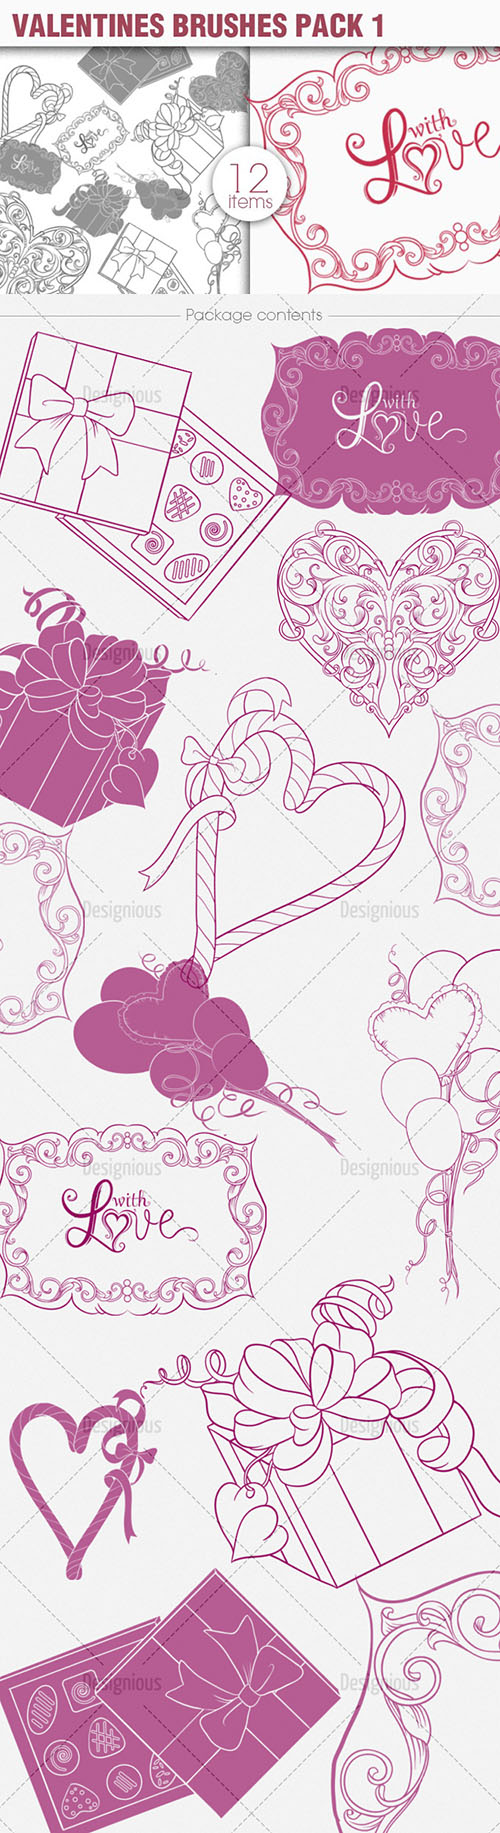 Valentines Day Photoshop Brushes Pack 1